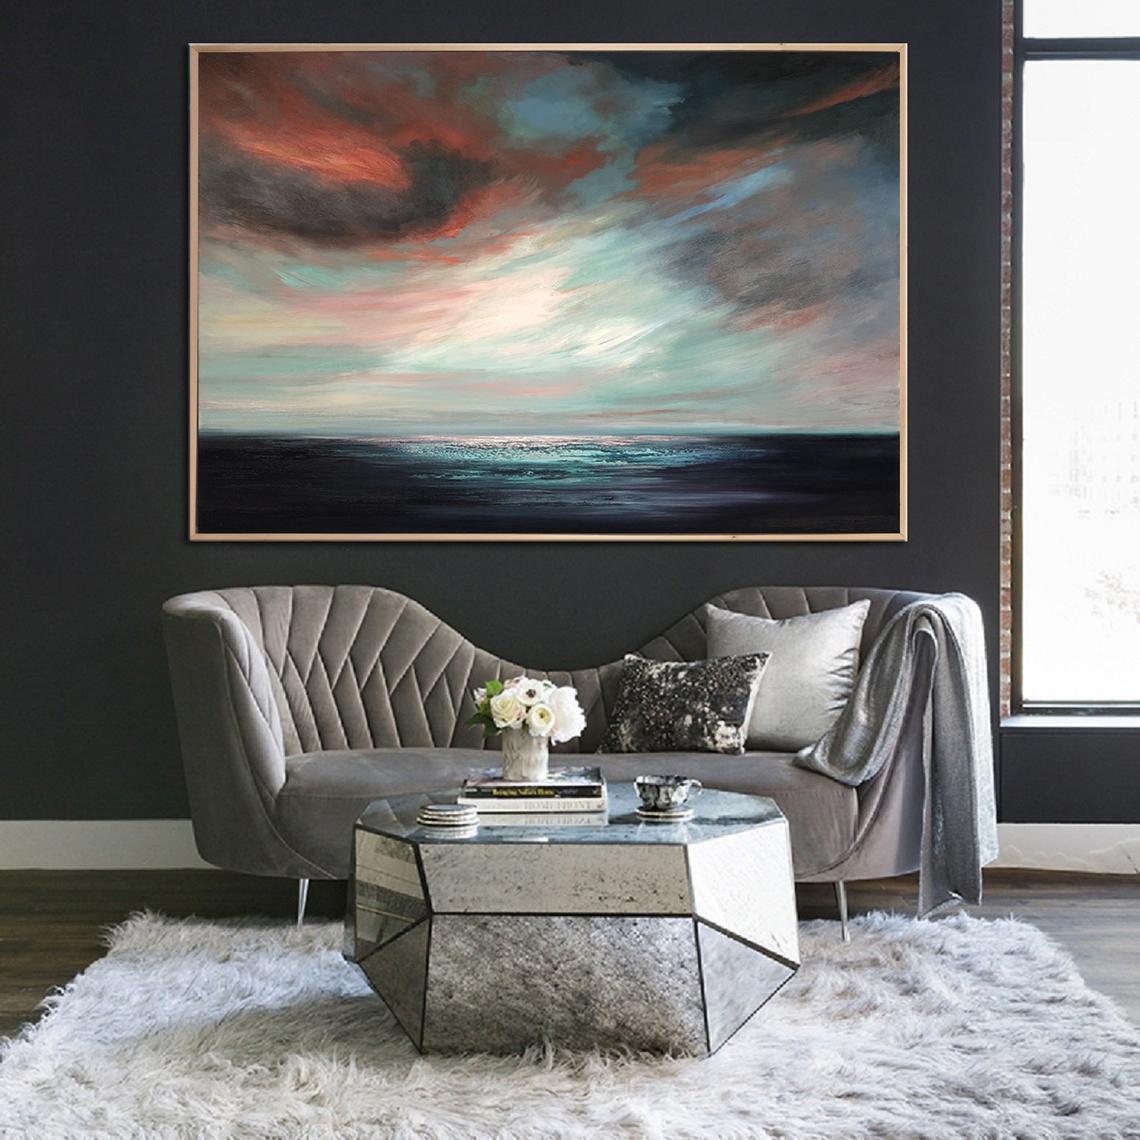 COLORFUL SKY from $340